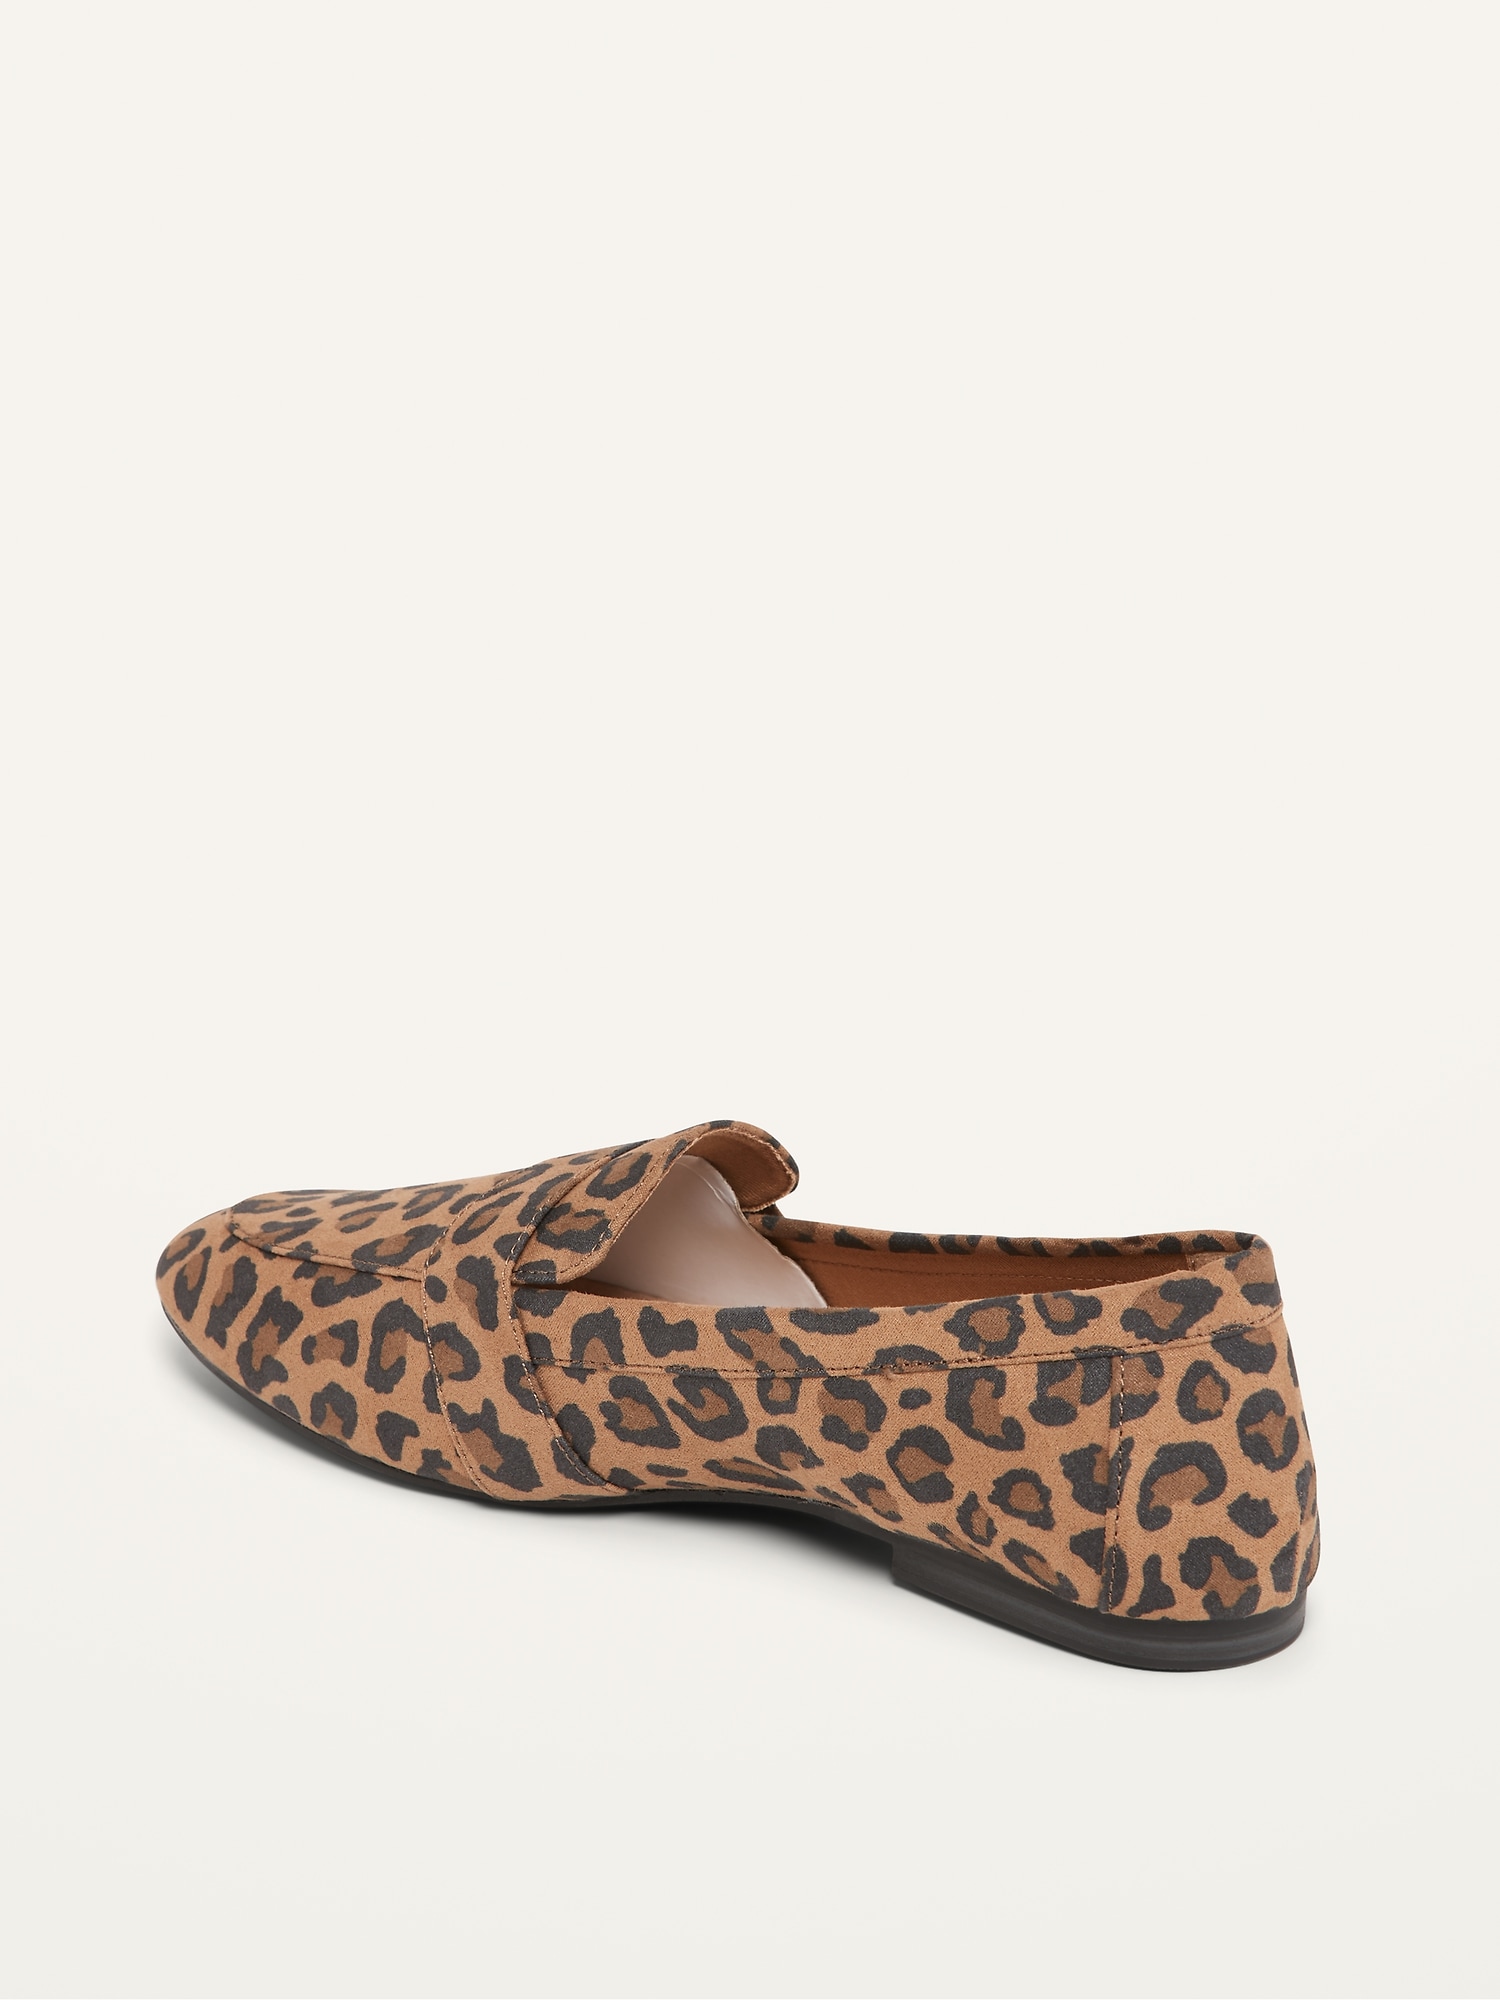 Faux-Suede Slip-On Loafer Shoes For Women | Old Navy